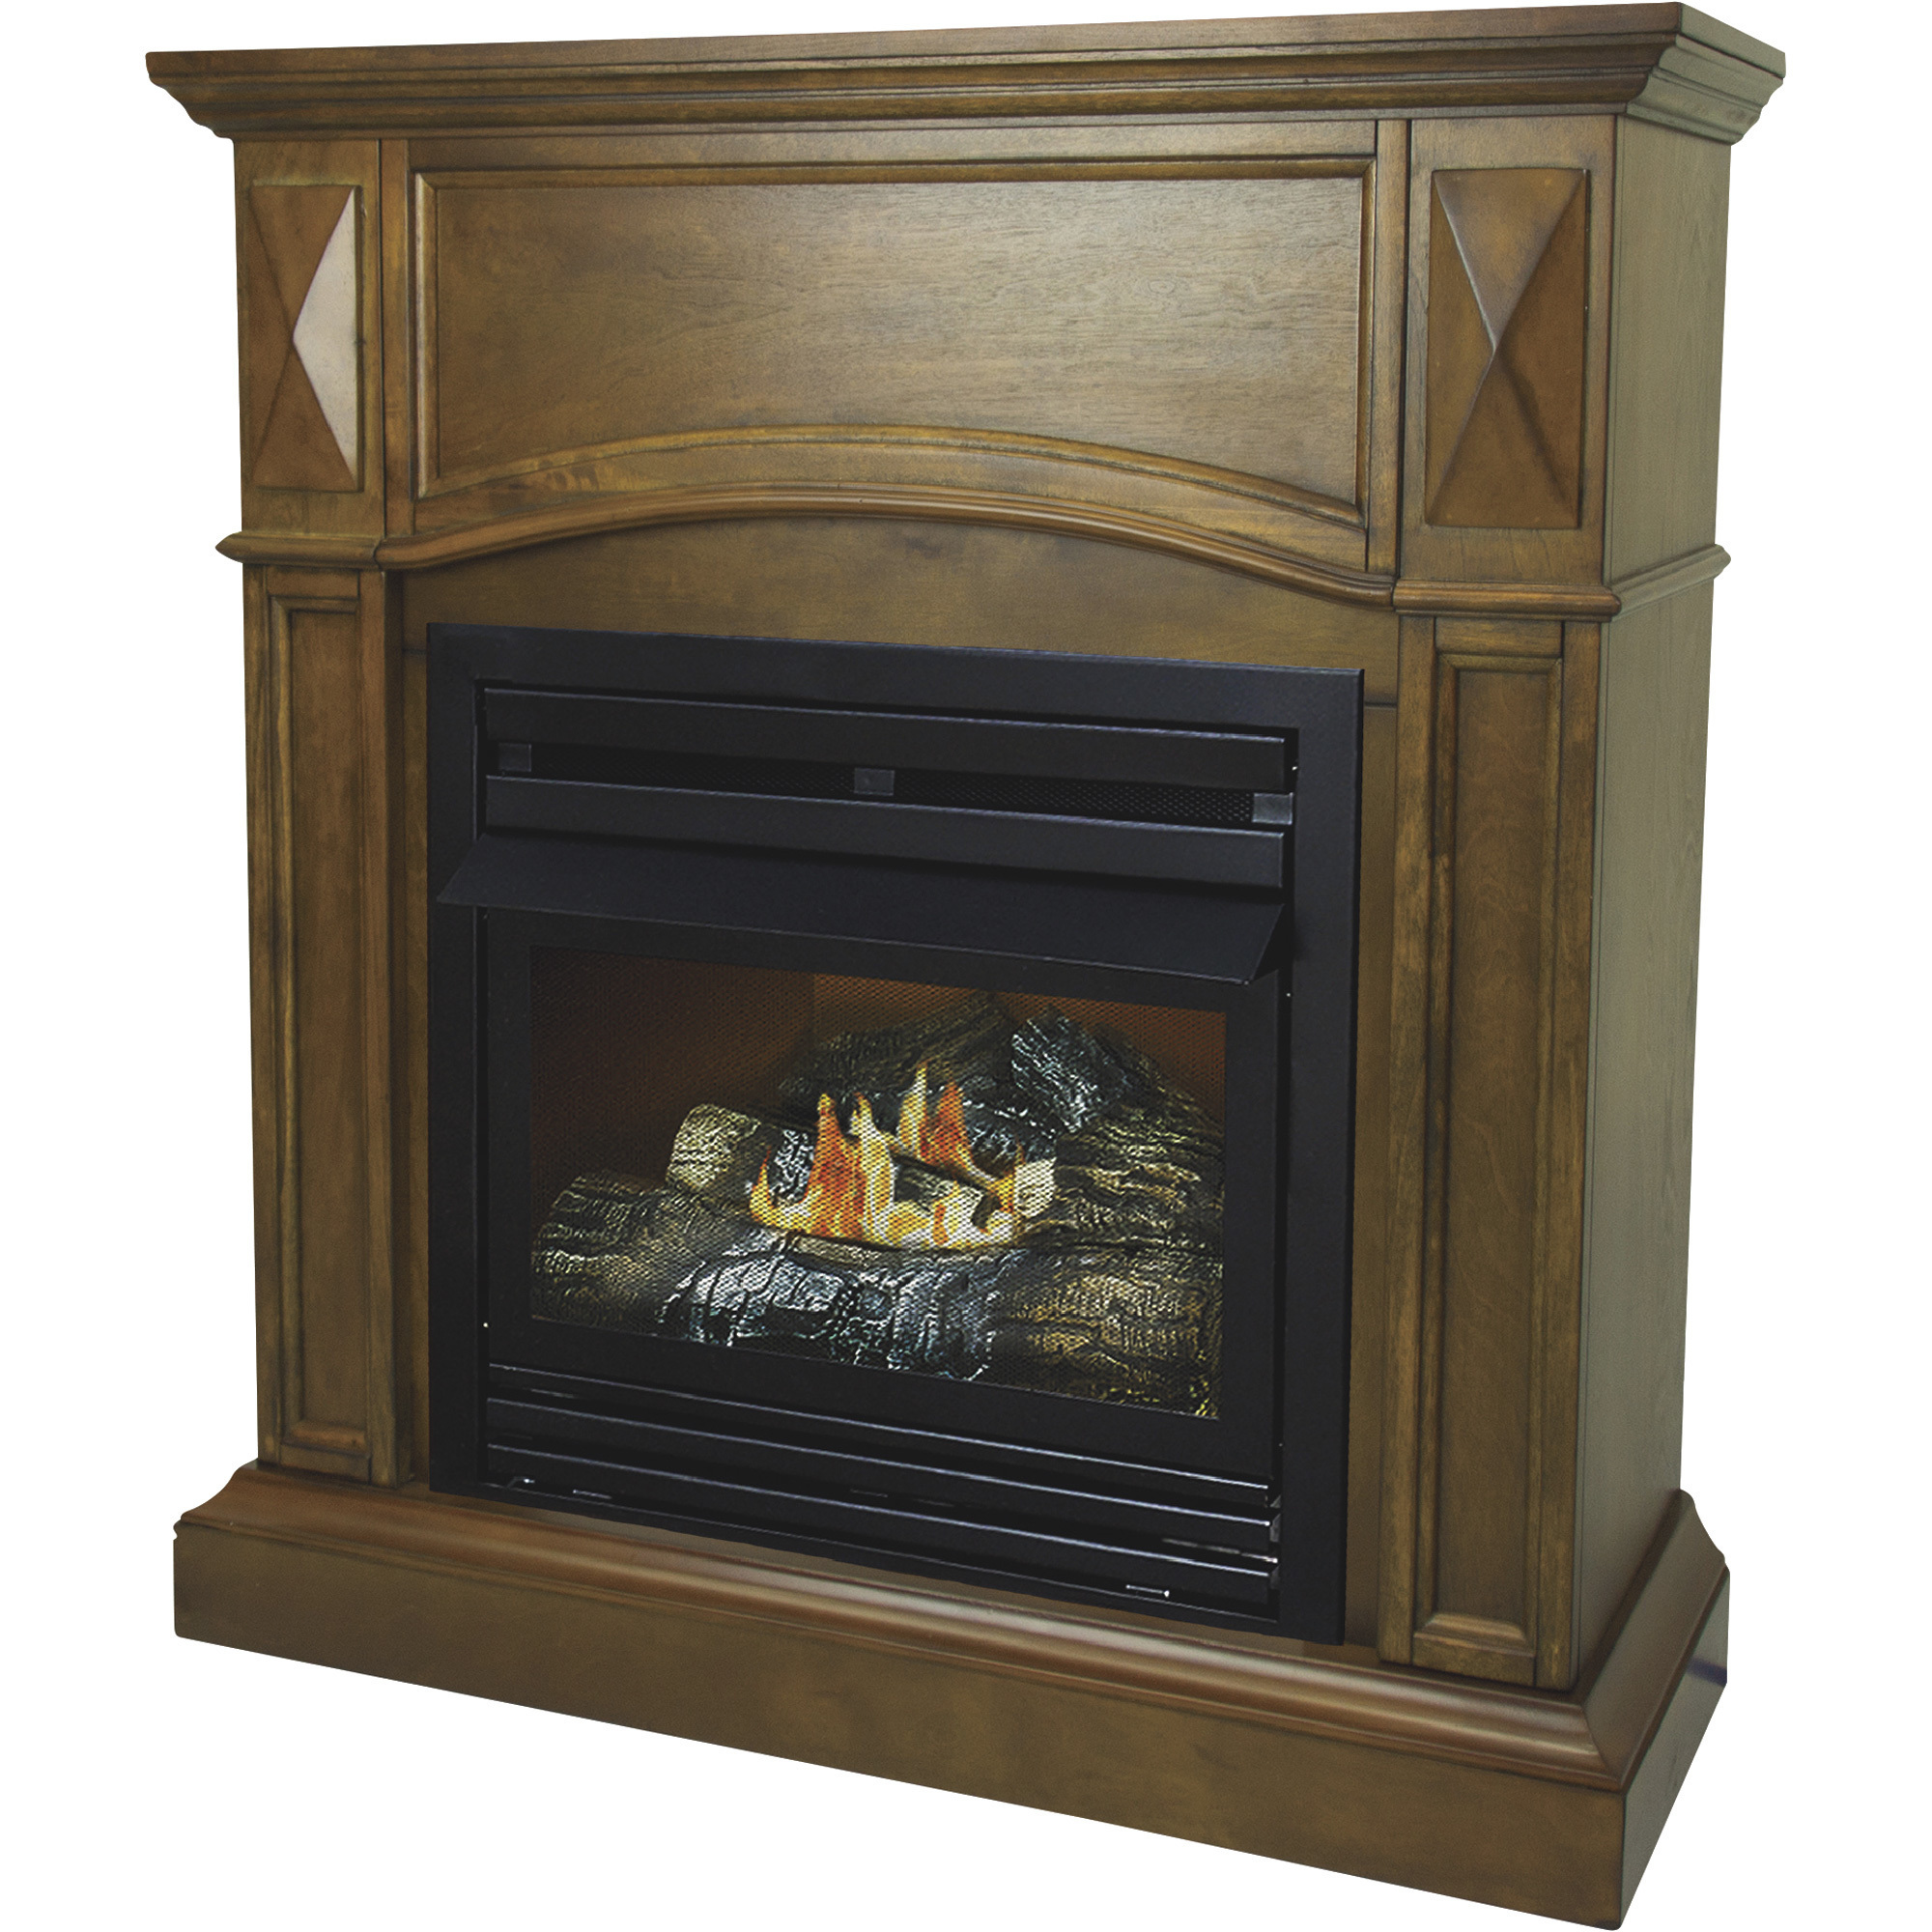 Pleasant Hearth Compact Vent-Free Fireplace, 20,000 BTU, 36Inch, Natural Gas, Heritage Finish, Model VFF-PH20NG